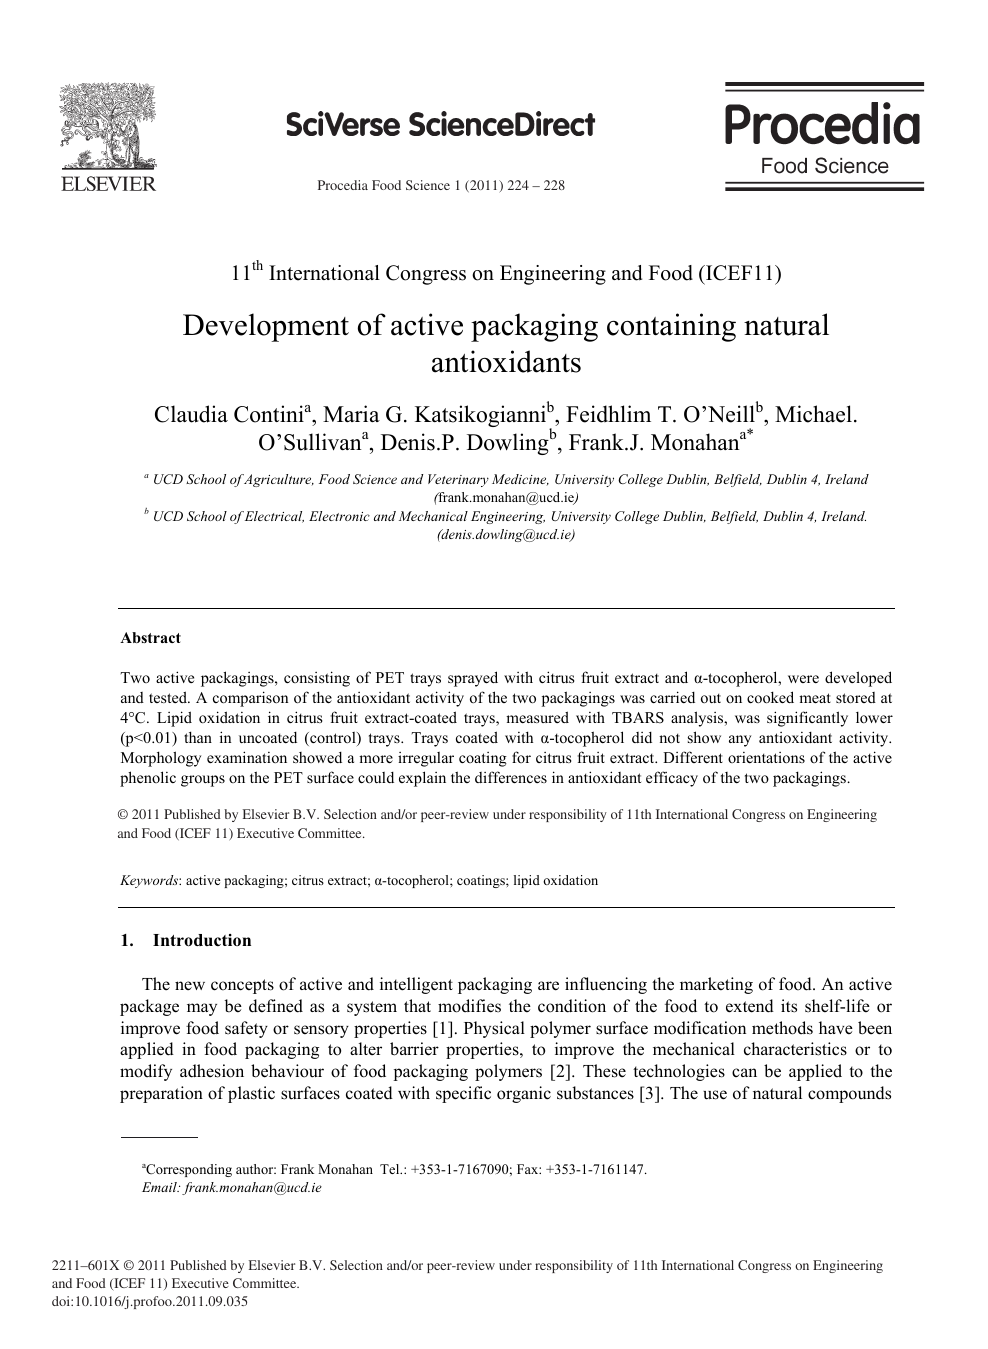 Development Of Active Packaging Containing Natural Antioxidants Topic Of Research Paper In Agriculture Forestry And Fisheries Download Scholarly Article Pdf And Read For Free On Cyberleninka Open Science Hub